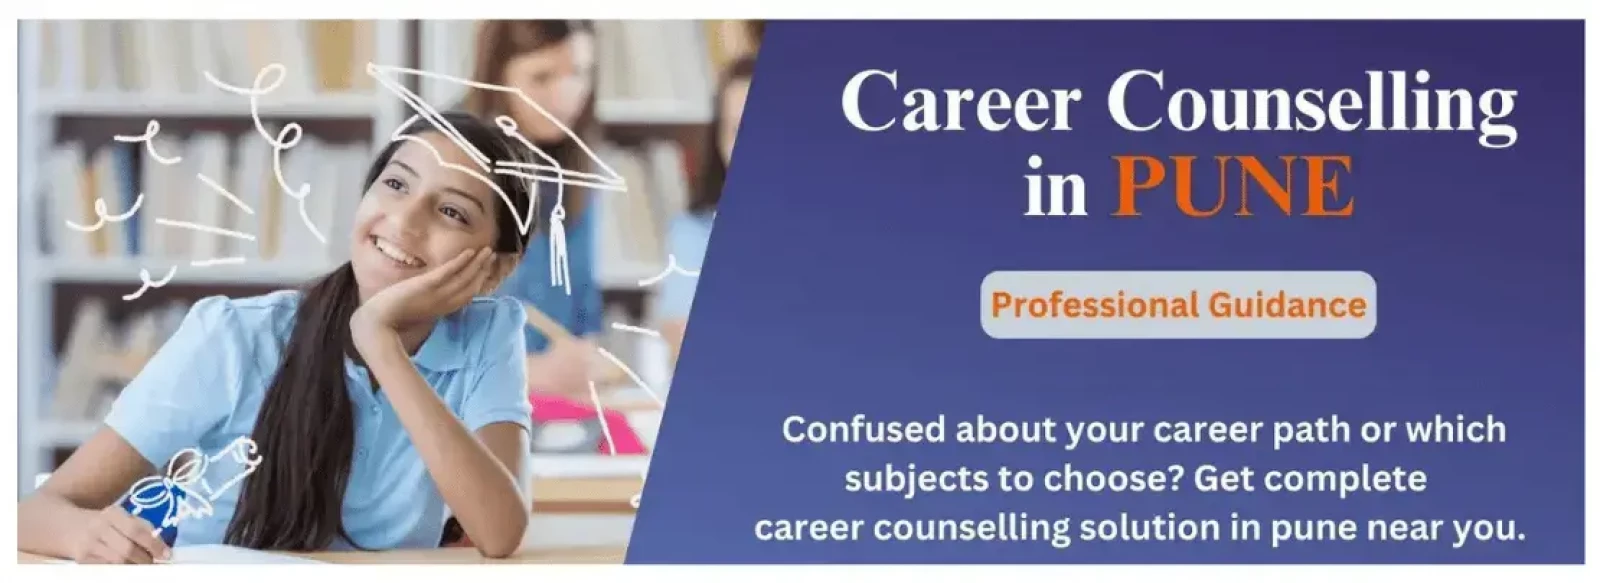 Career Counselling in Pune - Find Best Counsellors Near You!